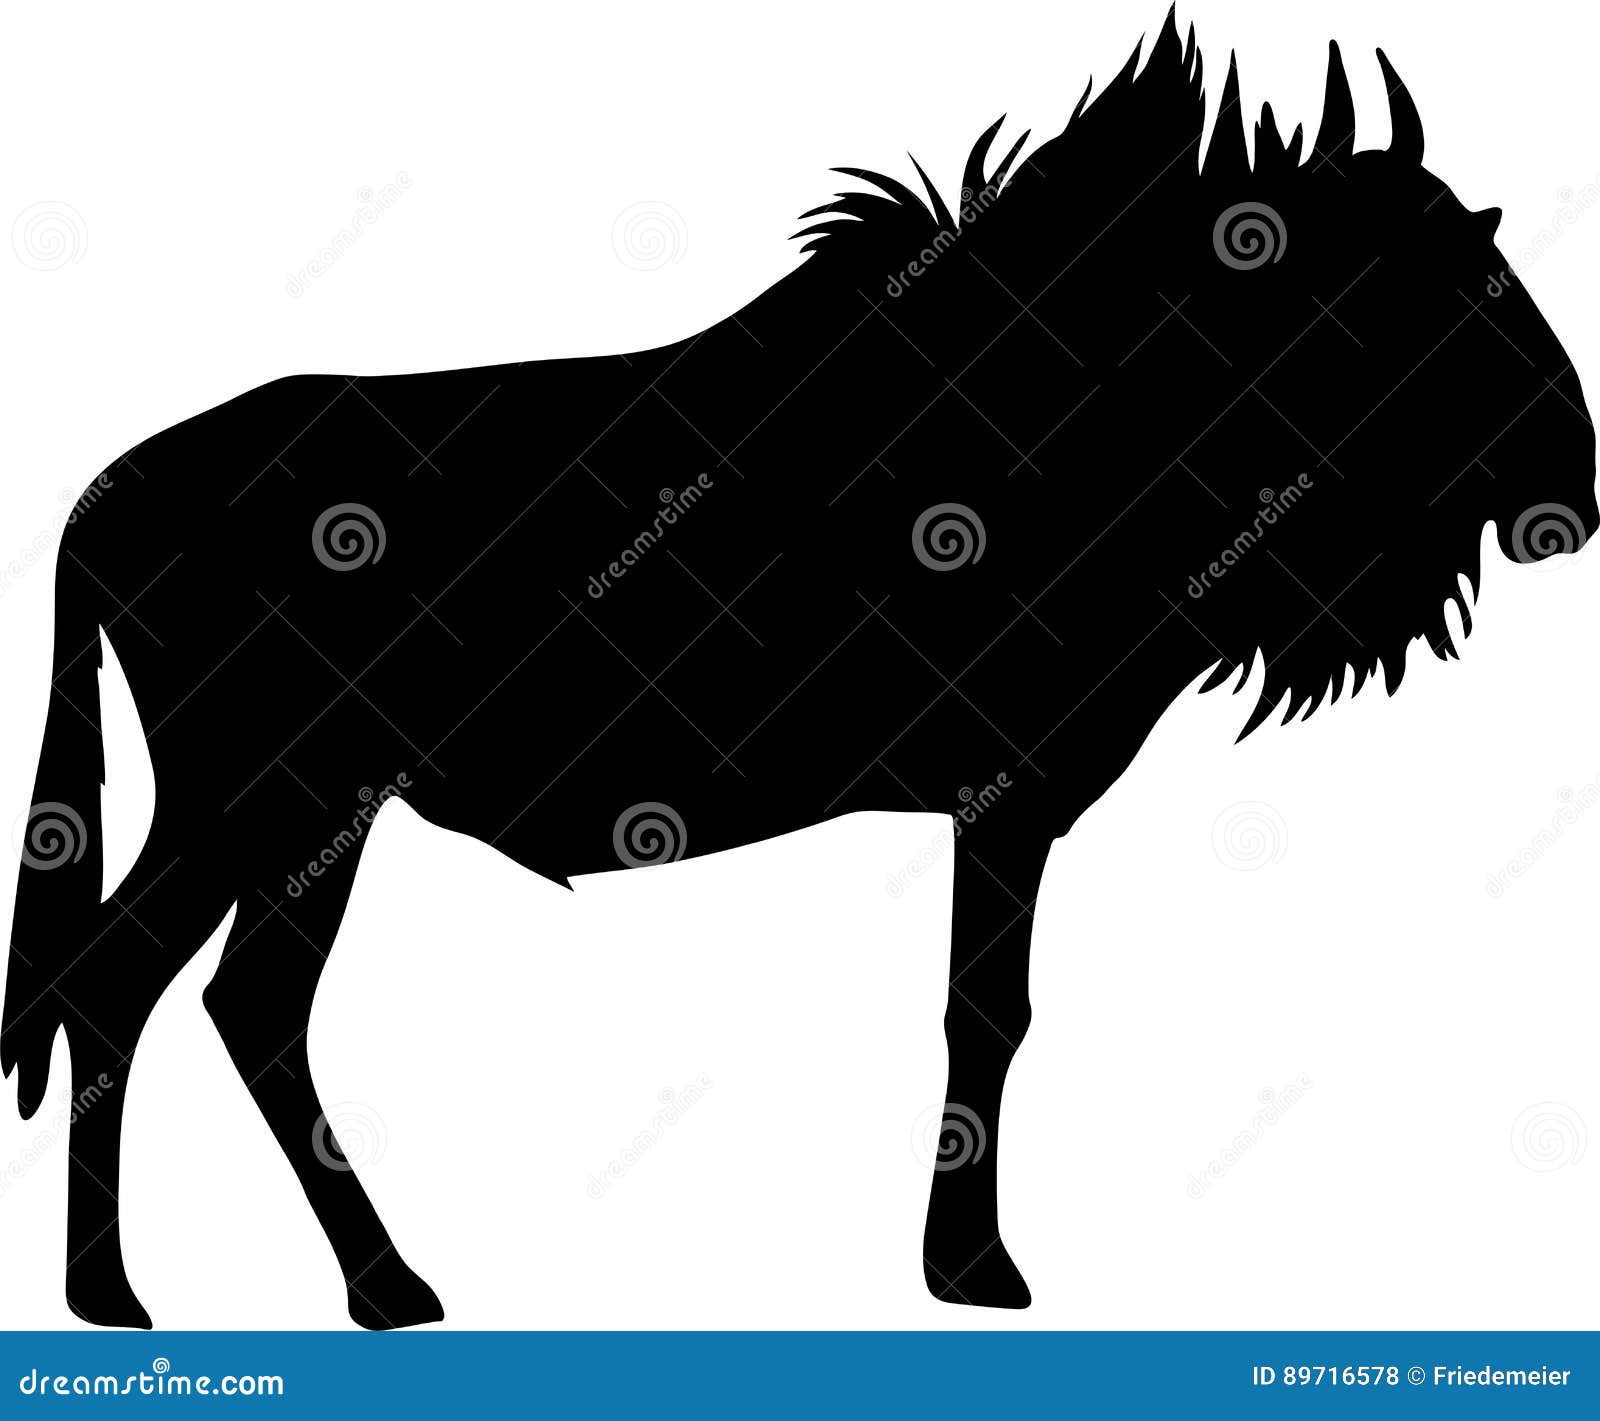 silhouette of a standing blue wildebeest antelope